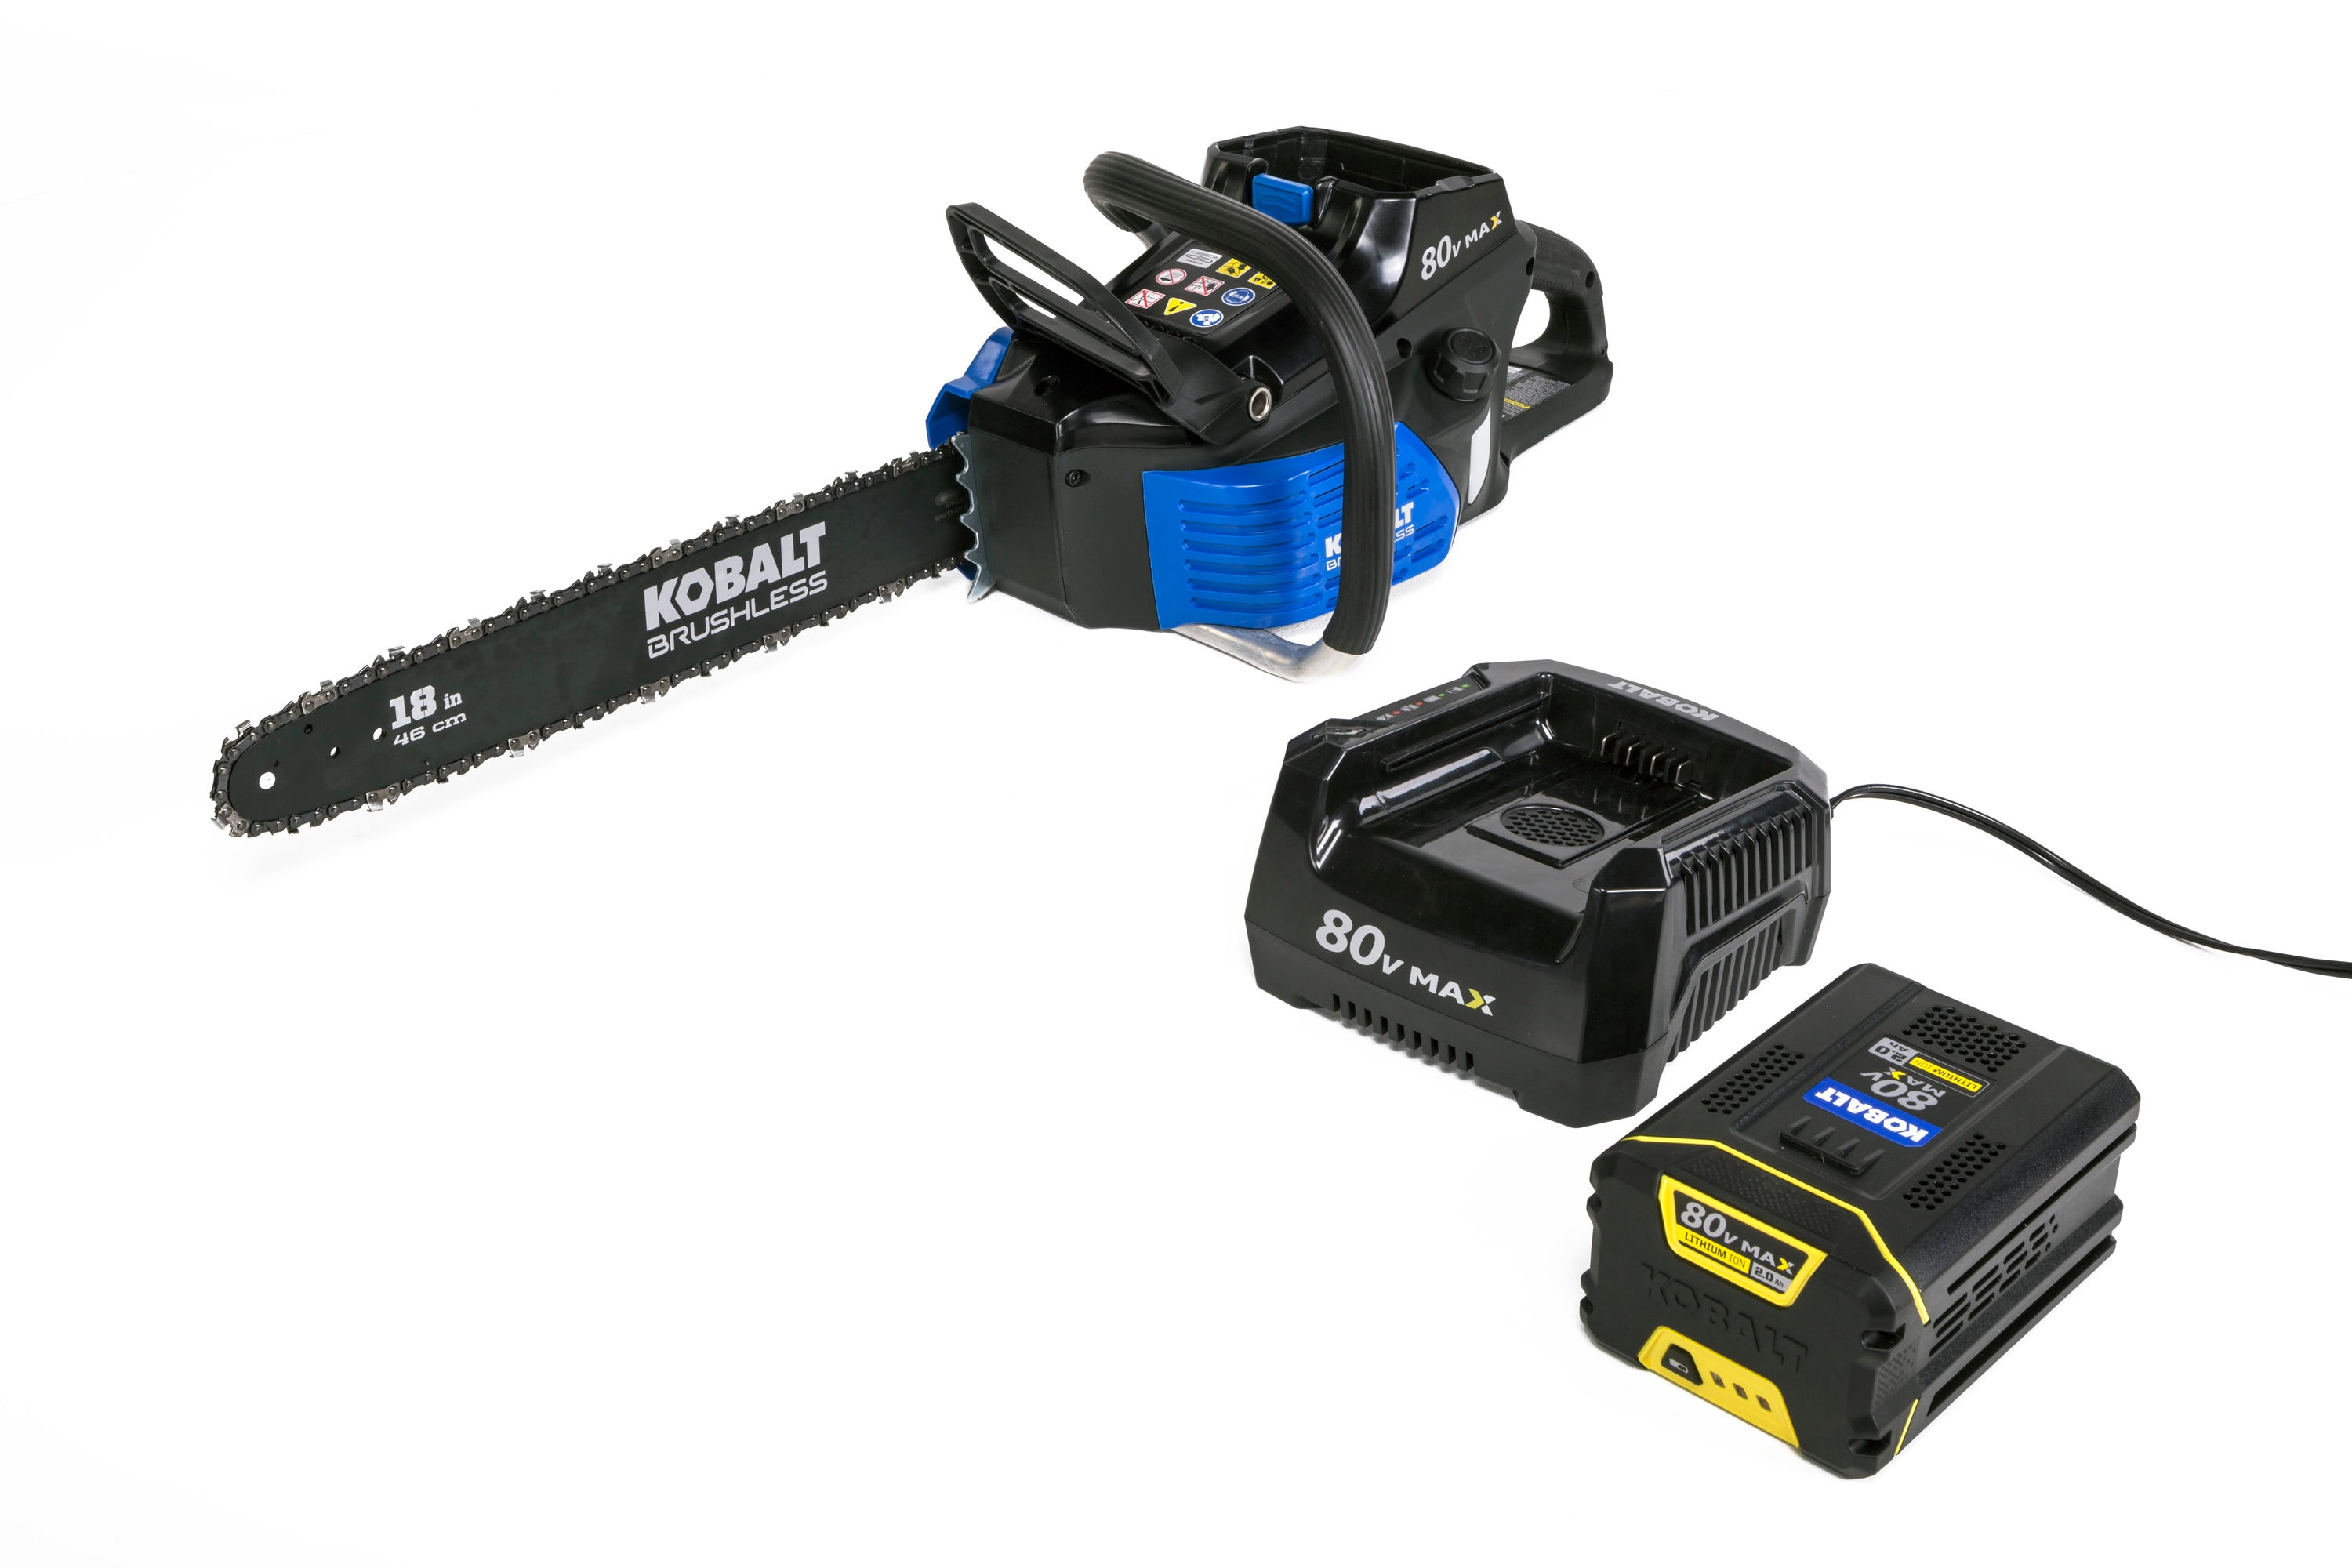 Chainsaw Only, Battery/Charger Not Included Kobalt 80-volt Lithium Ion 18-in Brushless Cordless Electric Chainsaw